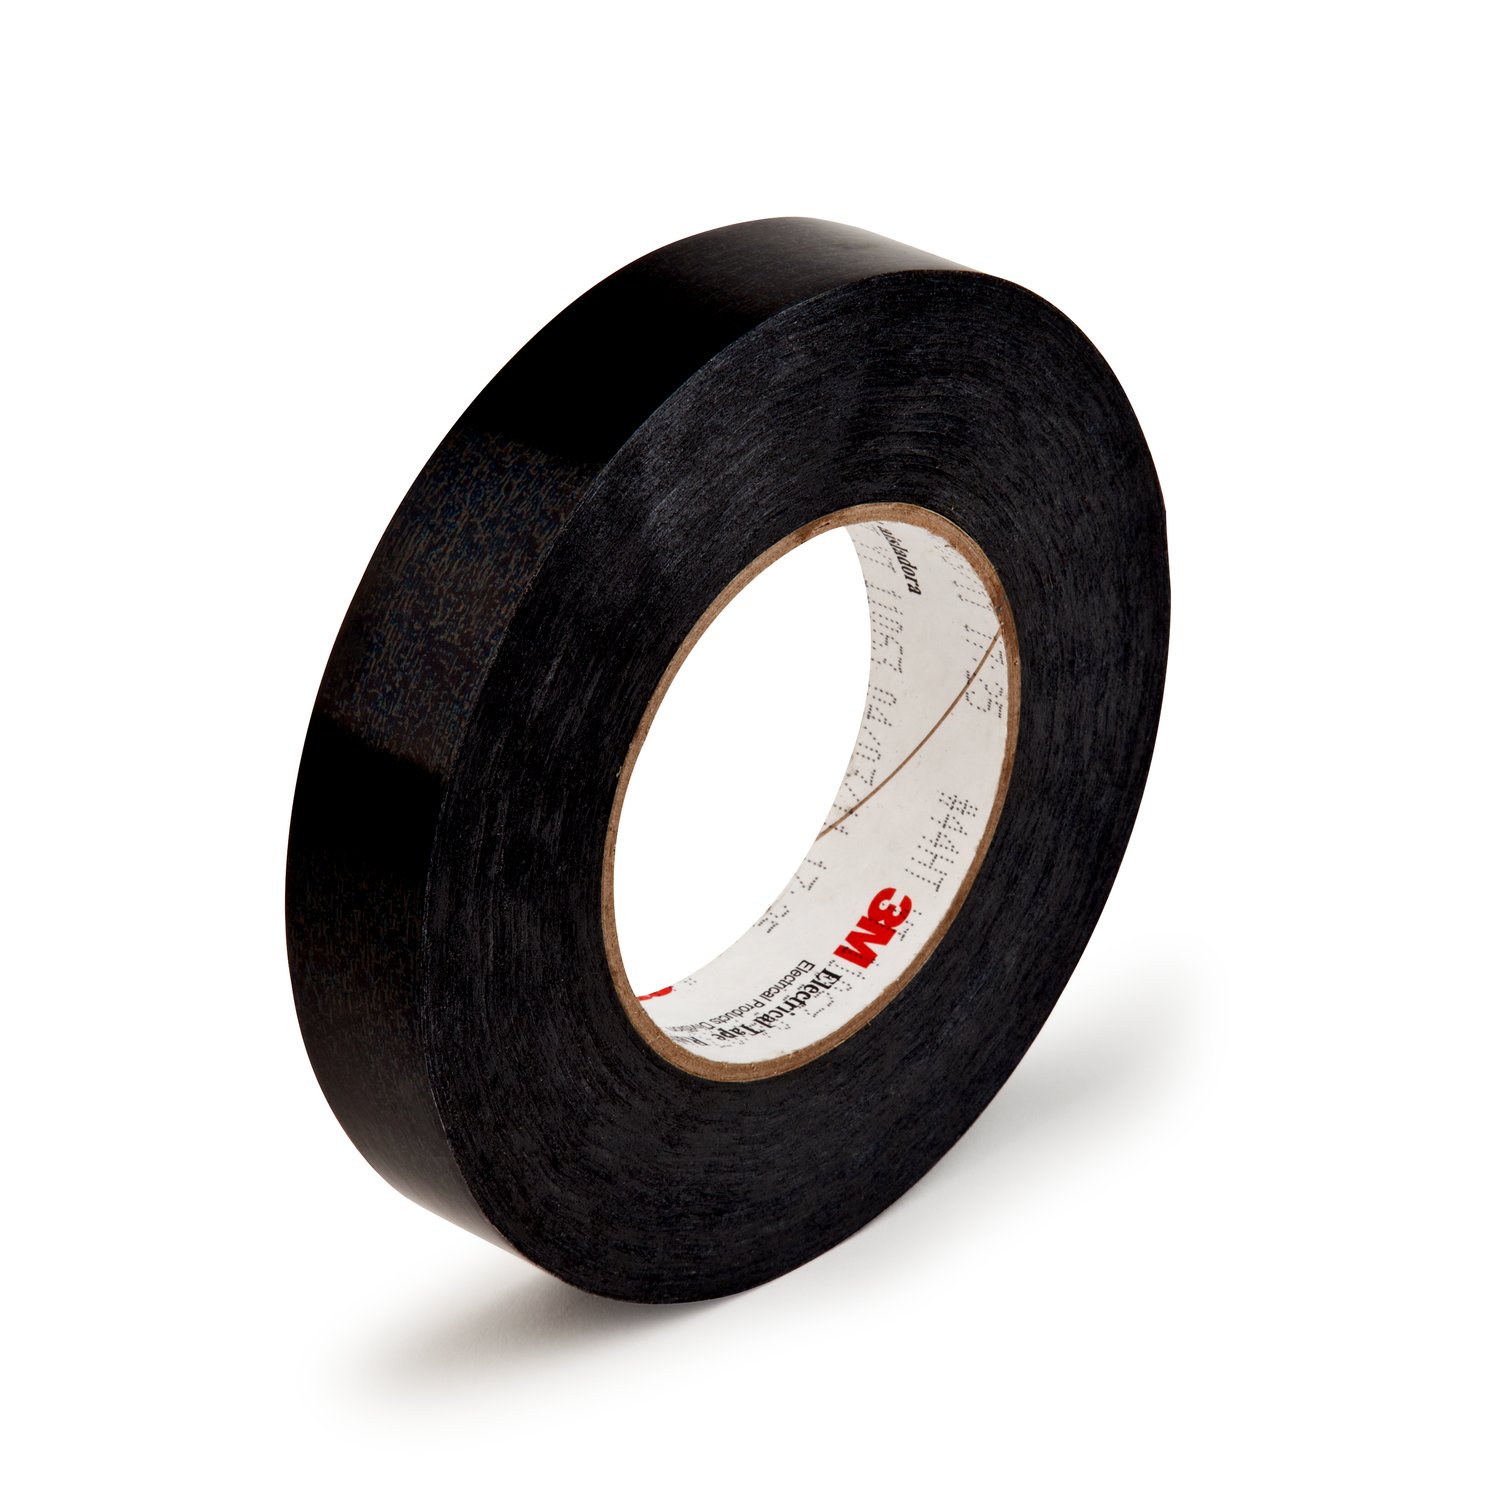 7010349827 - 3M Composite Film Electrical Tape 44HT, .3937-in (10mm) x 90 yd, 3 in
paper core, 96 Rolls/Case